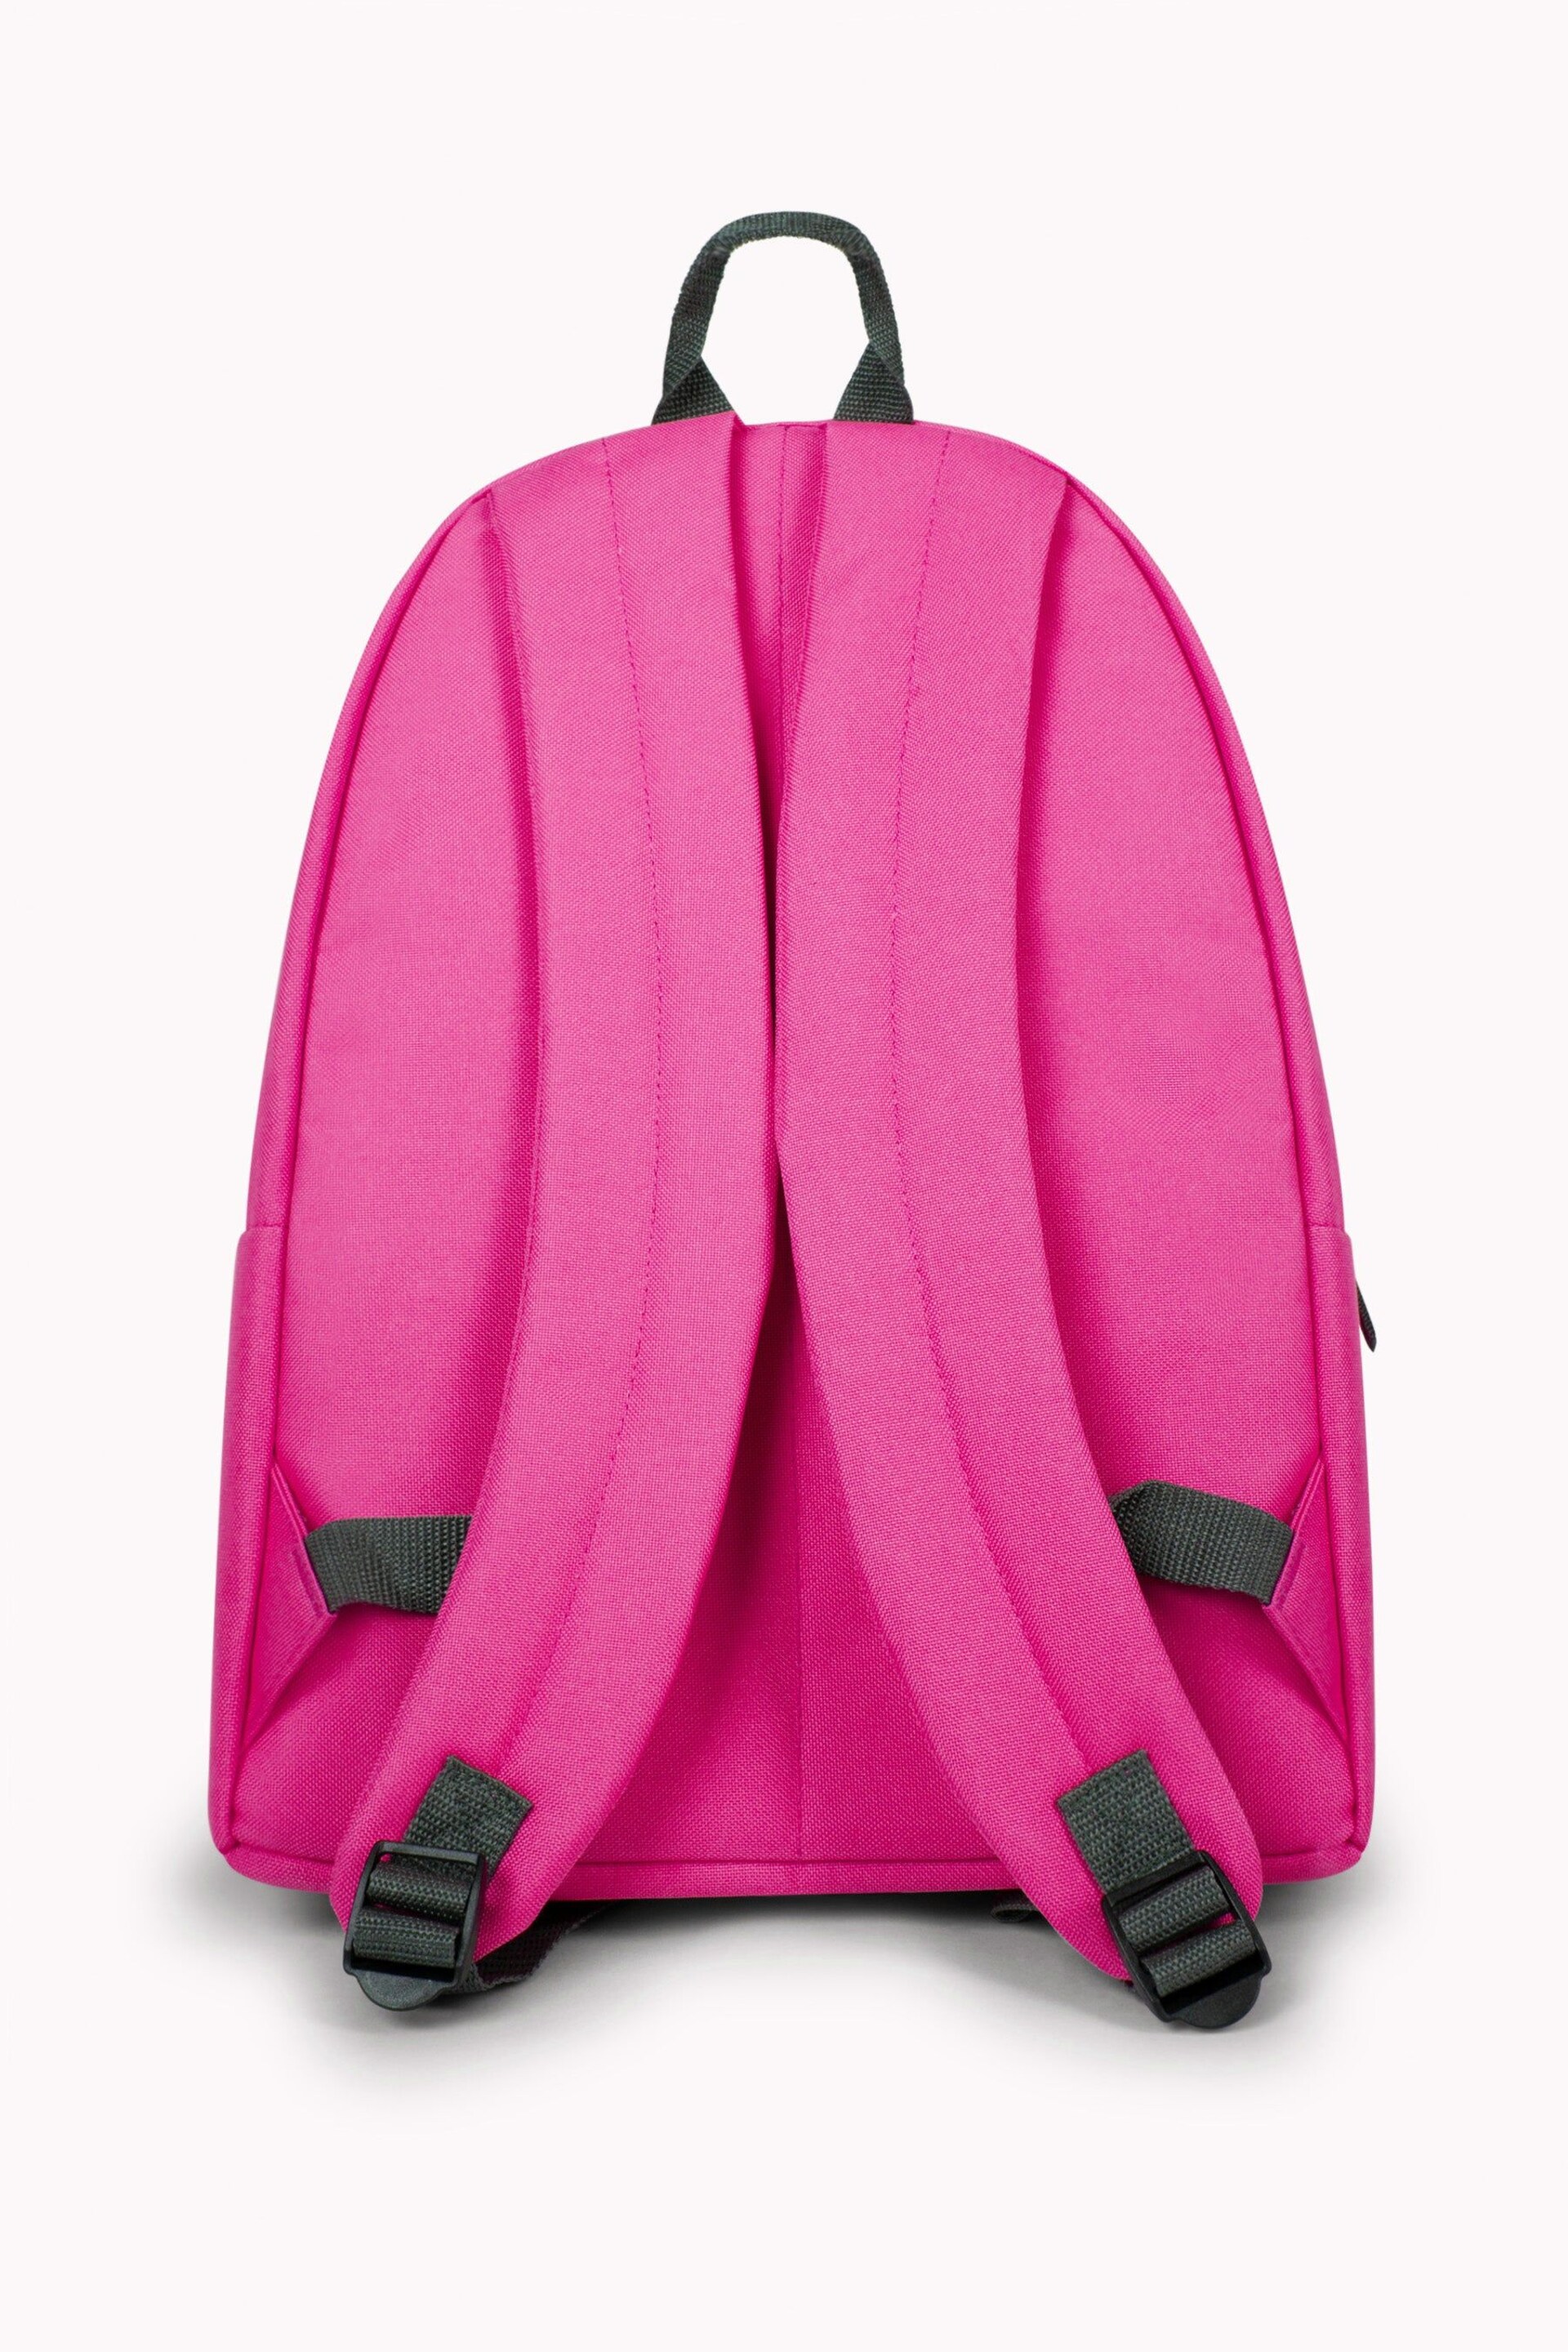 Hype. Iconic Backpack - Image 3 of 5